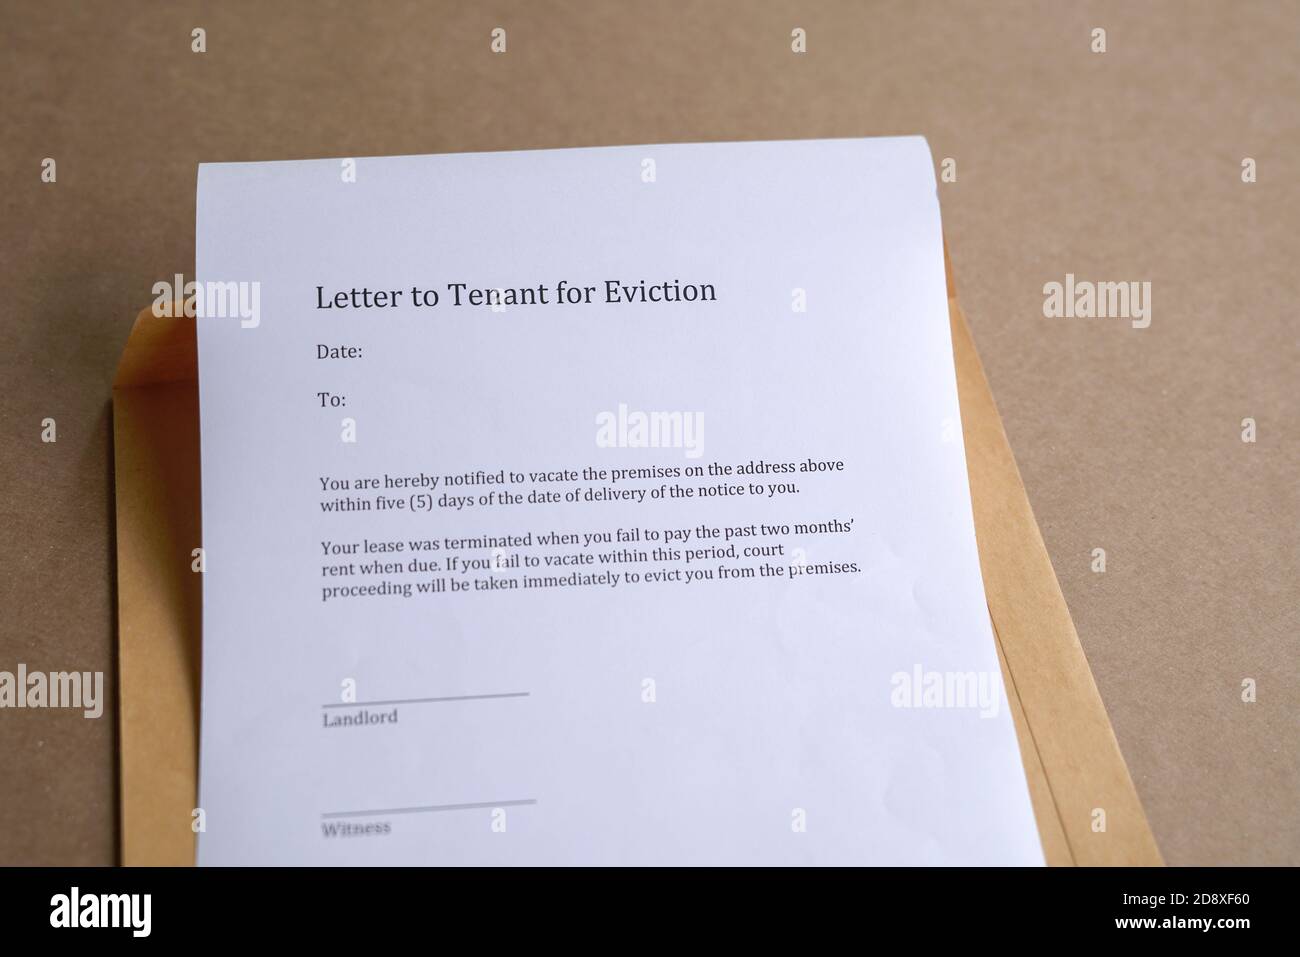 Letter to tenant for eviction, on top of brown envelope Stock Photo